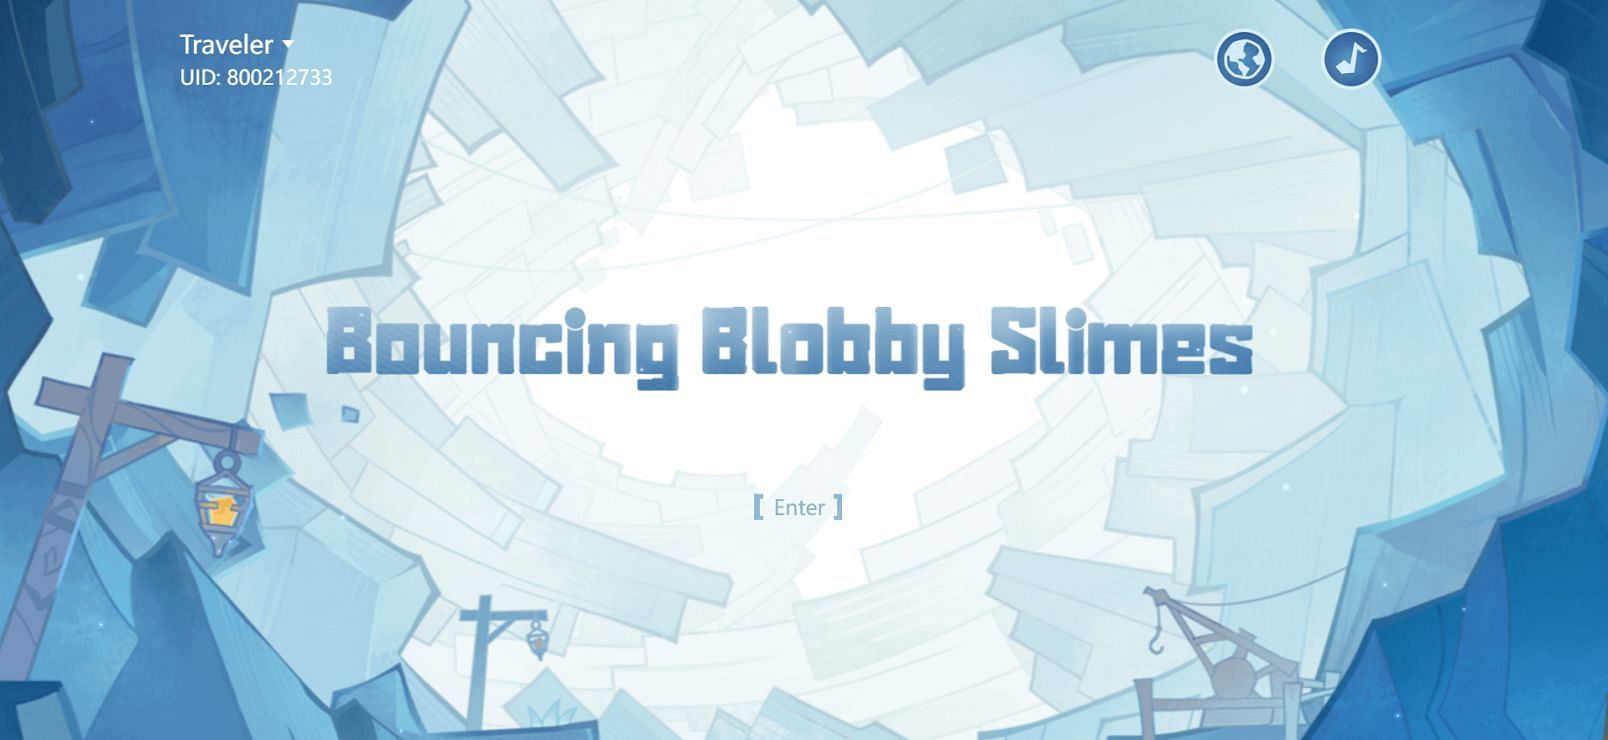 Bouncing Blobby Slimes front page (Image via HoYoverse)